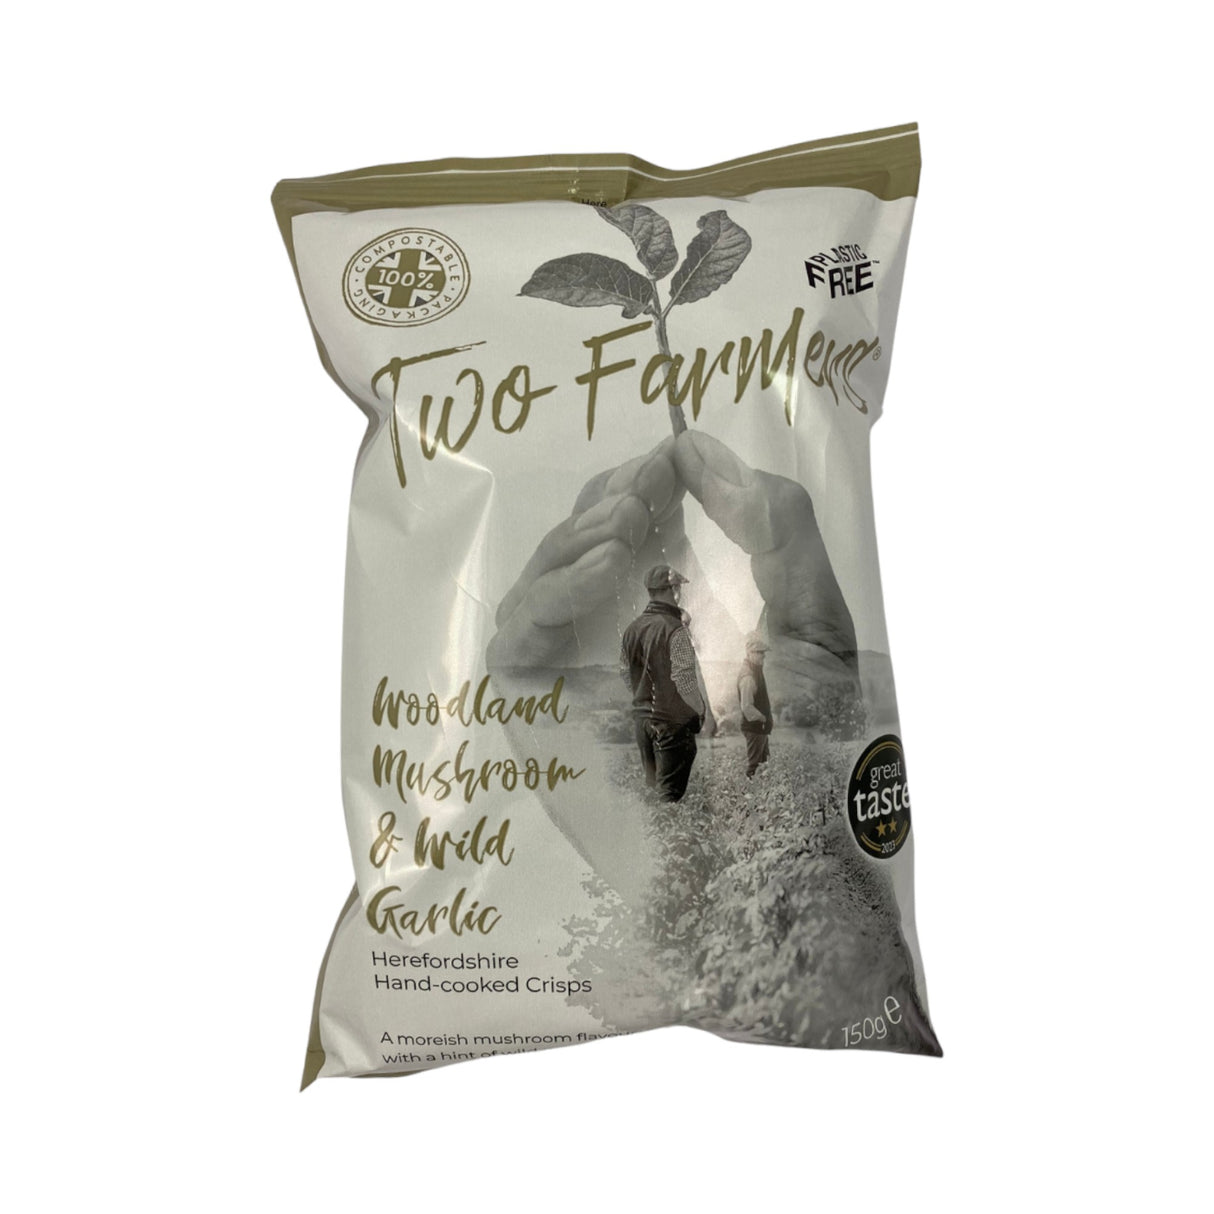 Two Farmers - Hand Cooked Herefordshire Sausage & Mustard Crisps 150g